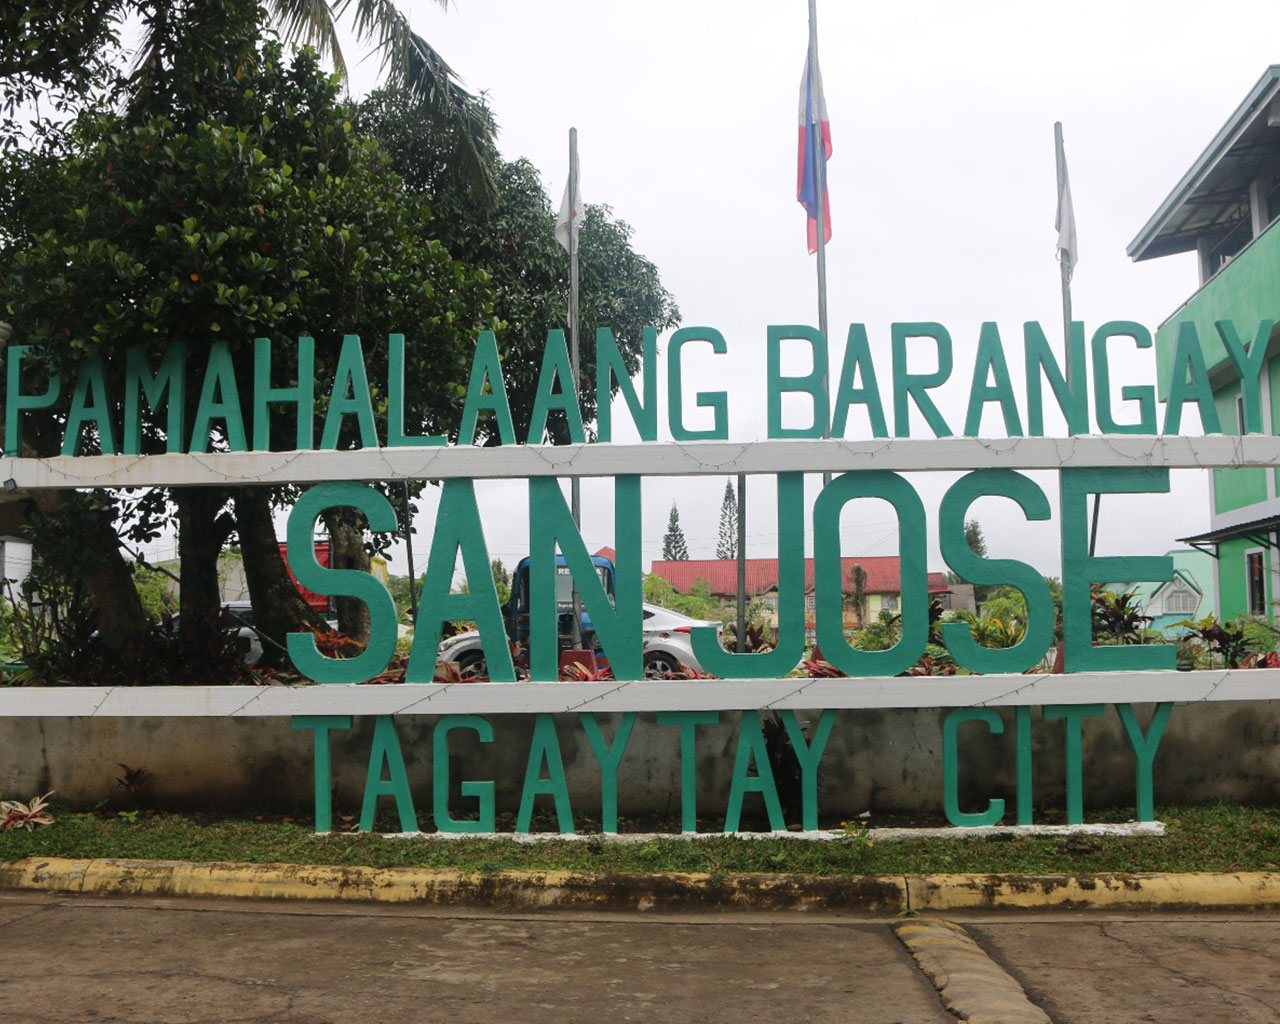 A monument sign in Tagaytay city.